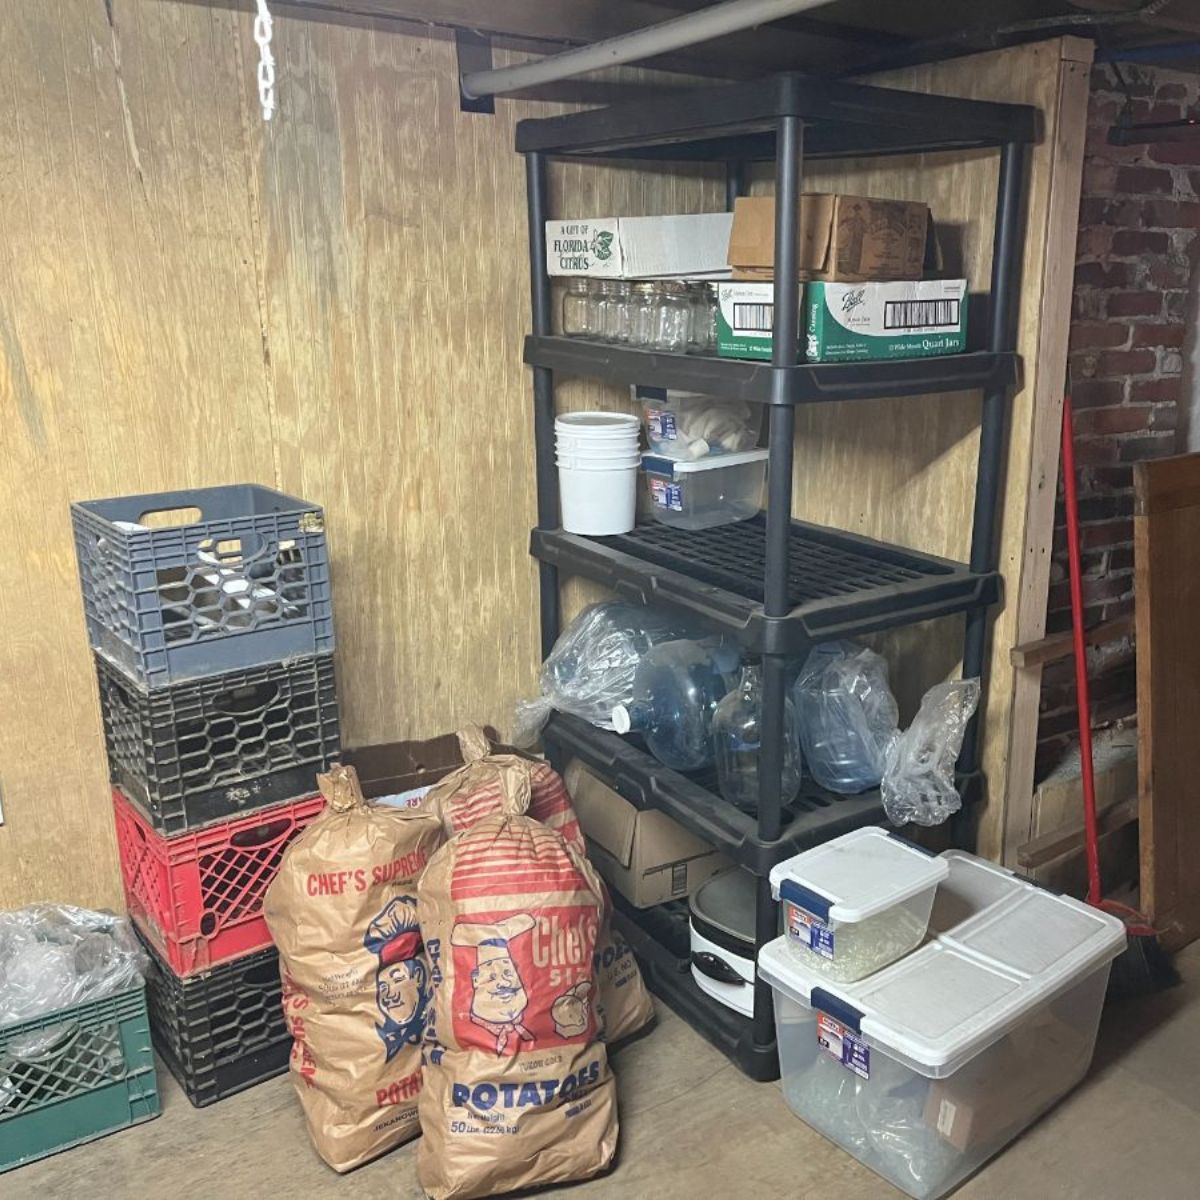 Basement cold storage room stacked  with fruit and vegetables in crates and shelves.